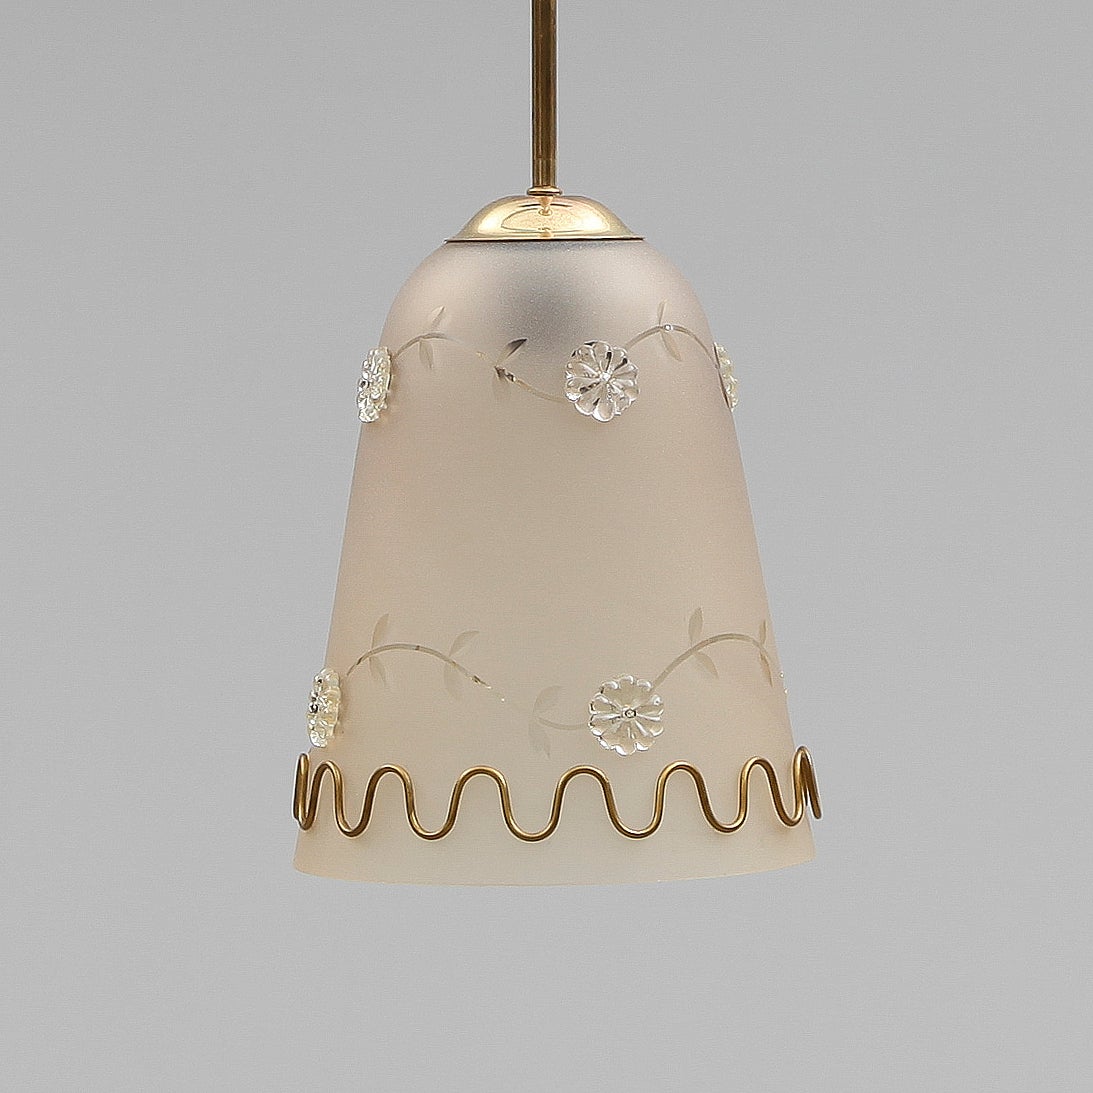 Vintage Scandinavian pendant by T R & Co., Norway. Body of brass. Bell-shaped opaque glass shade with etched decoration and fittings of brass. Marked TR & Co. Dimension: H 10